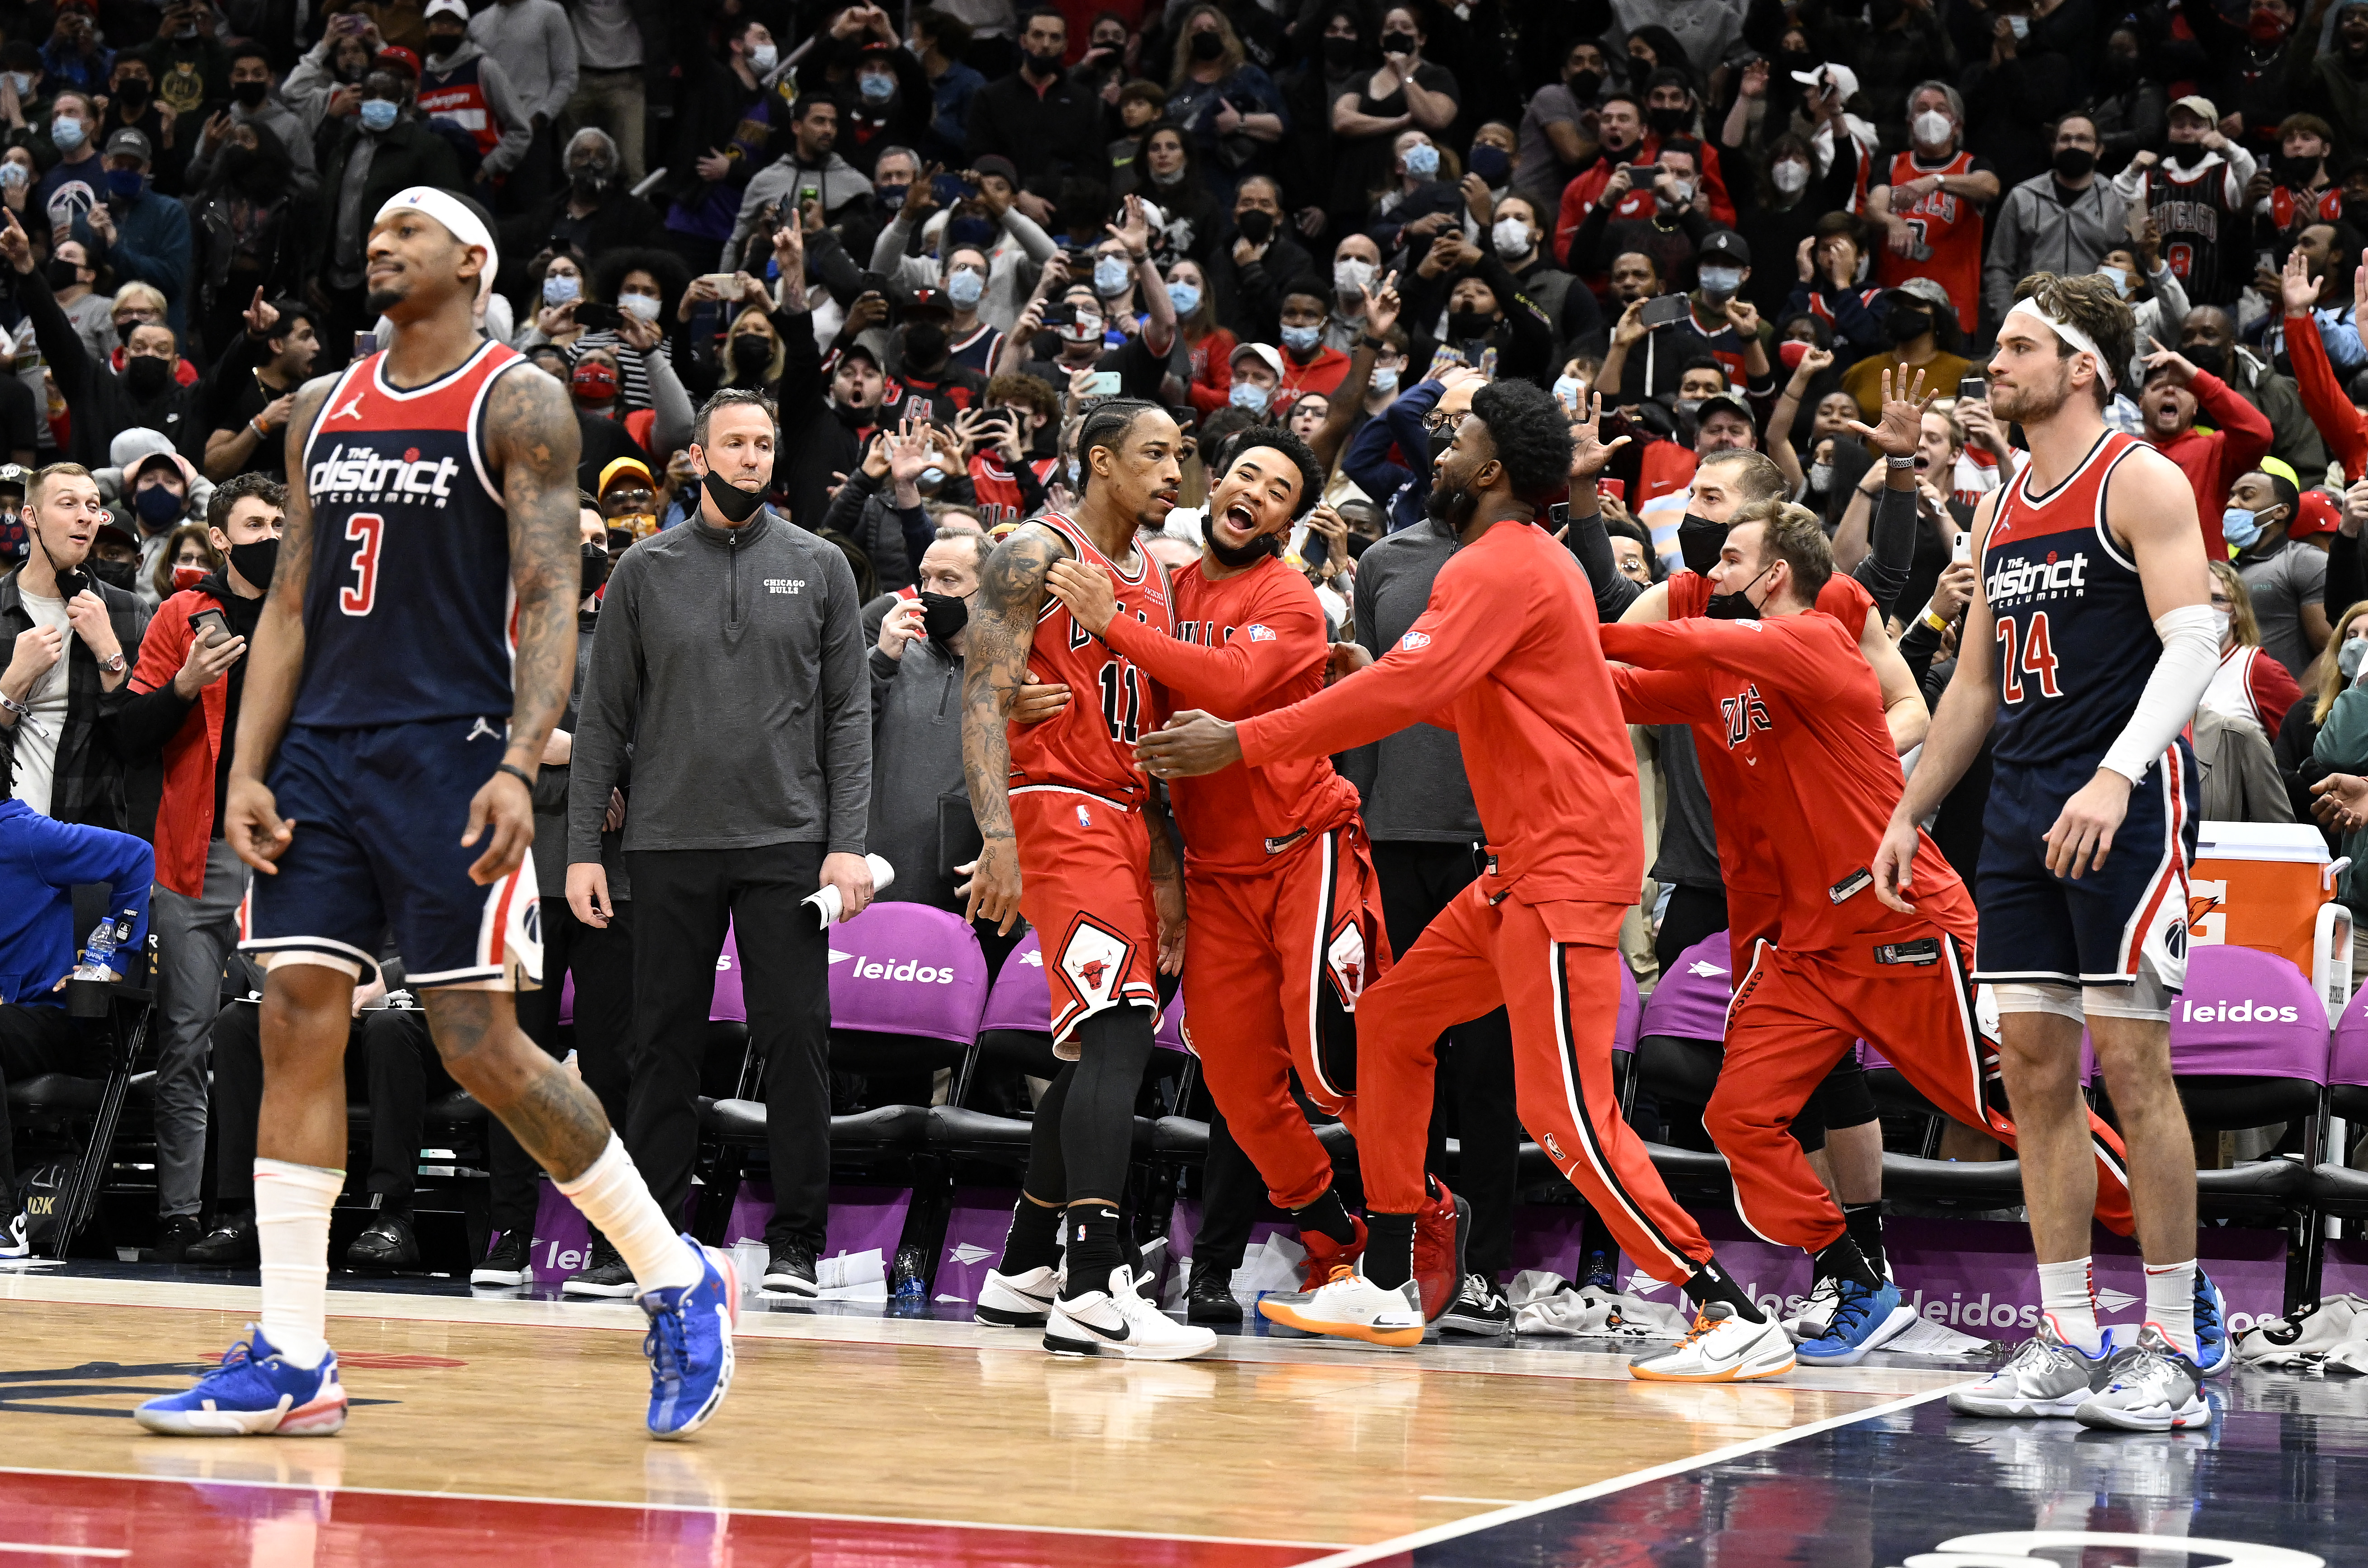 Chicago Bulls star DeMar DeRozan celebrates his game-winner against the Washington Wizards as Bradley Beal and Corey Kispert look on in dismay